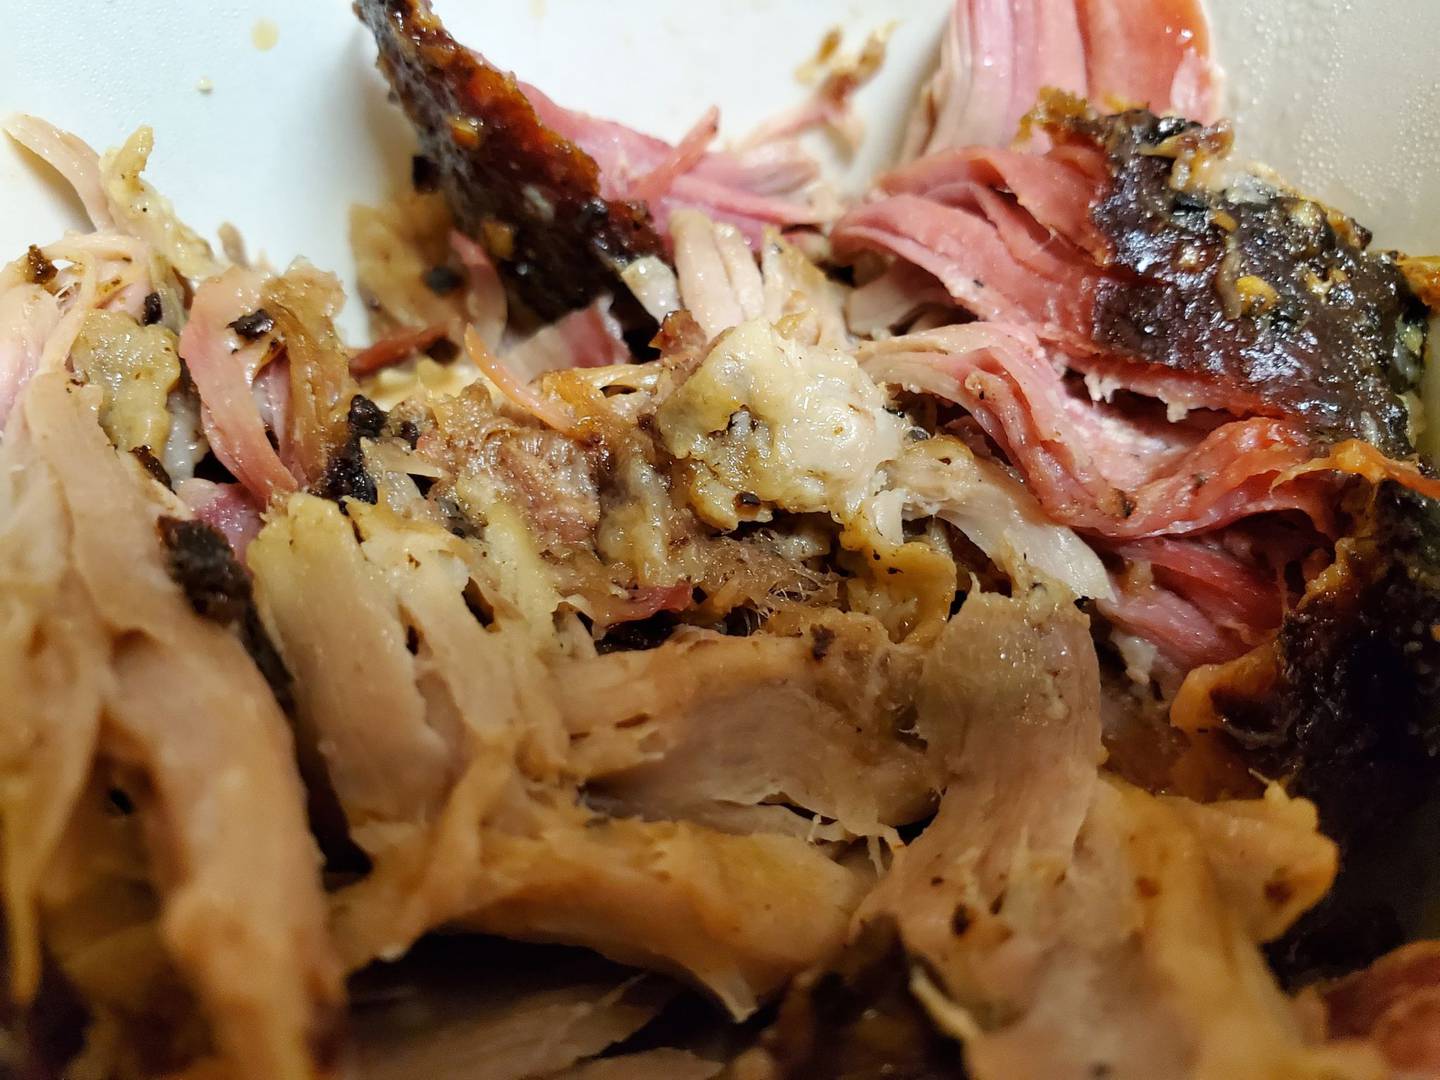 This is the pulled pork as served by Station One Smokehouse in Plainfield.